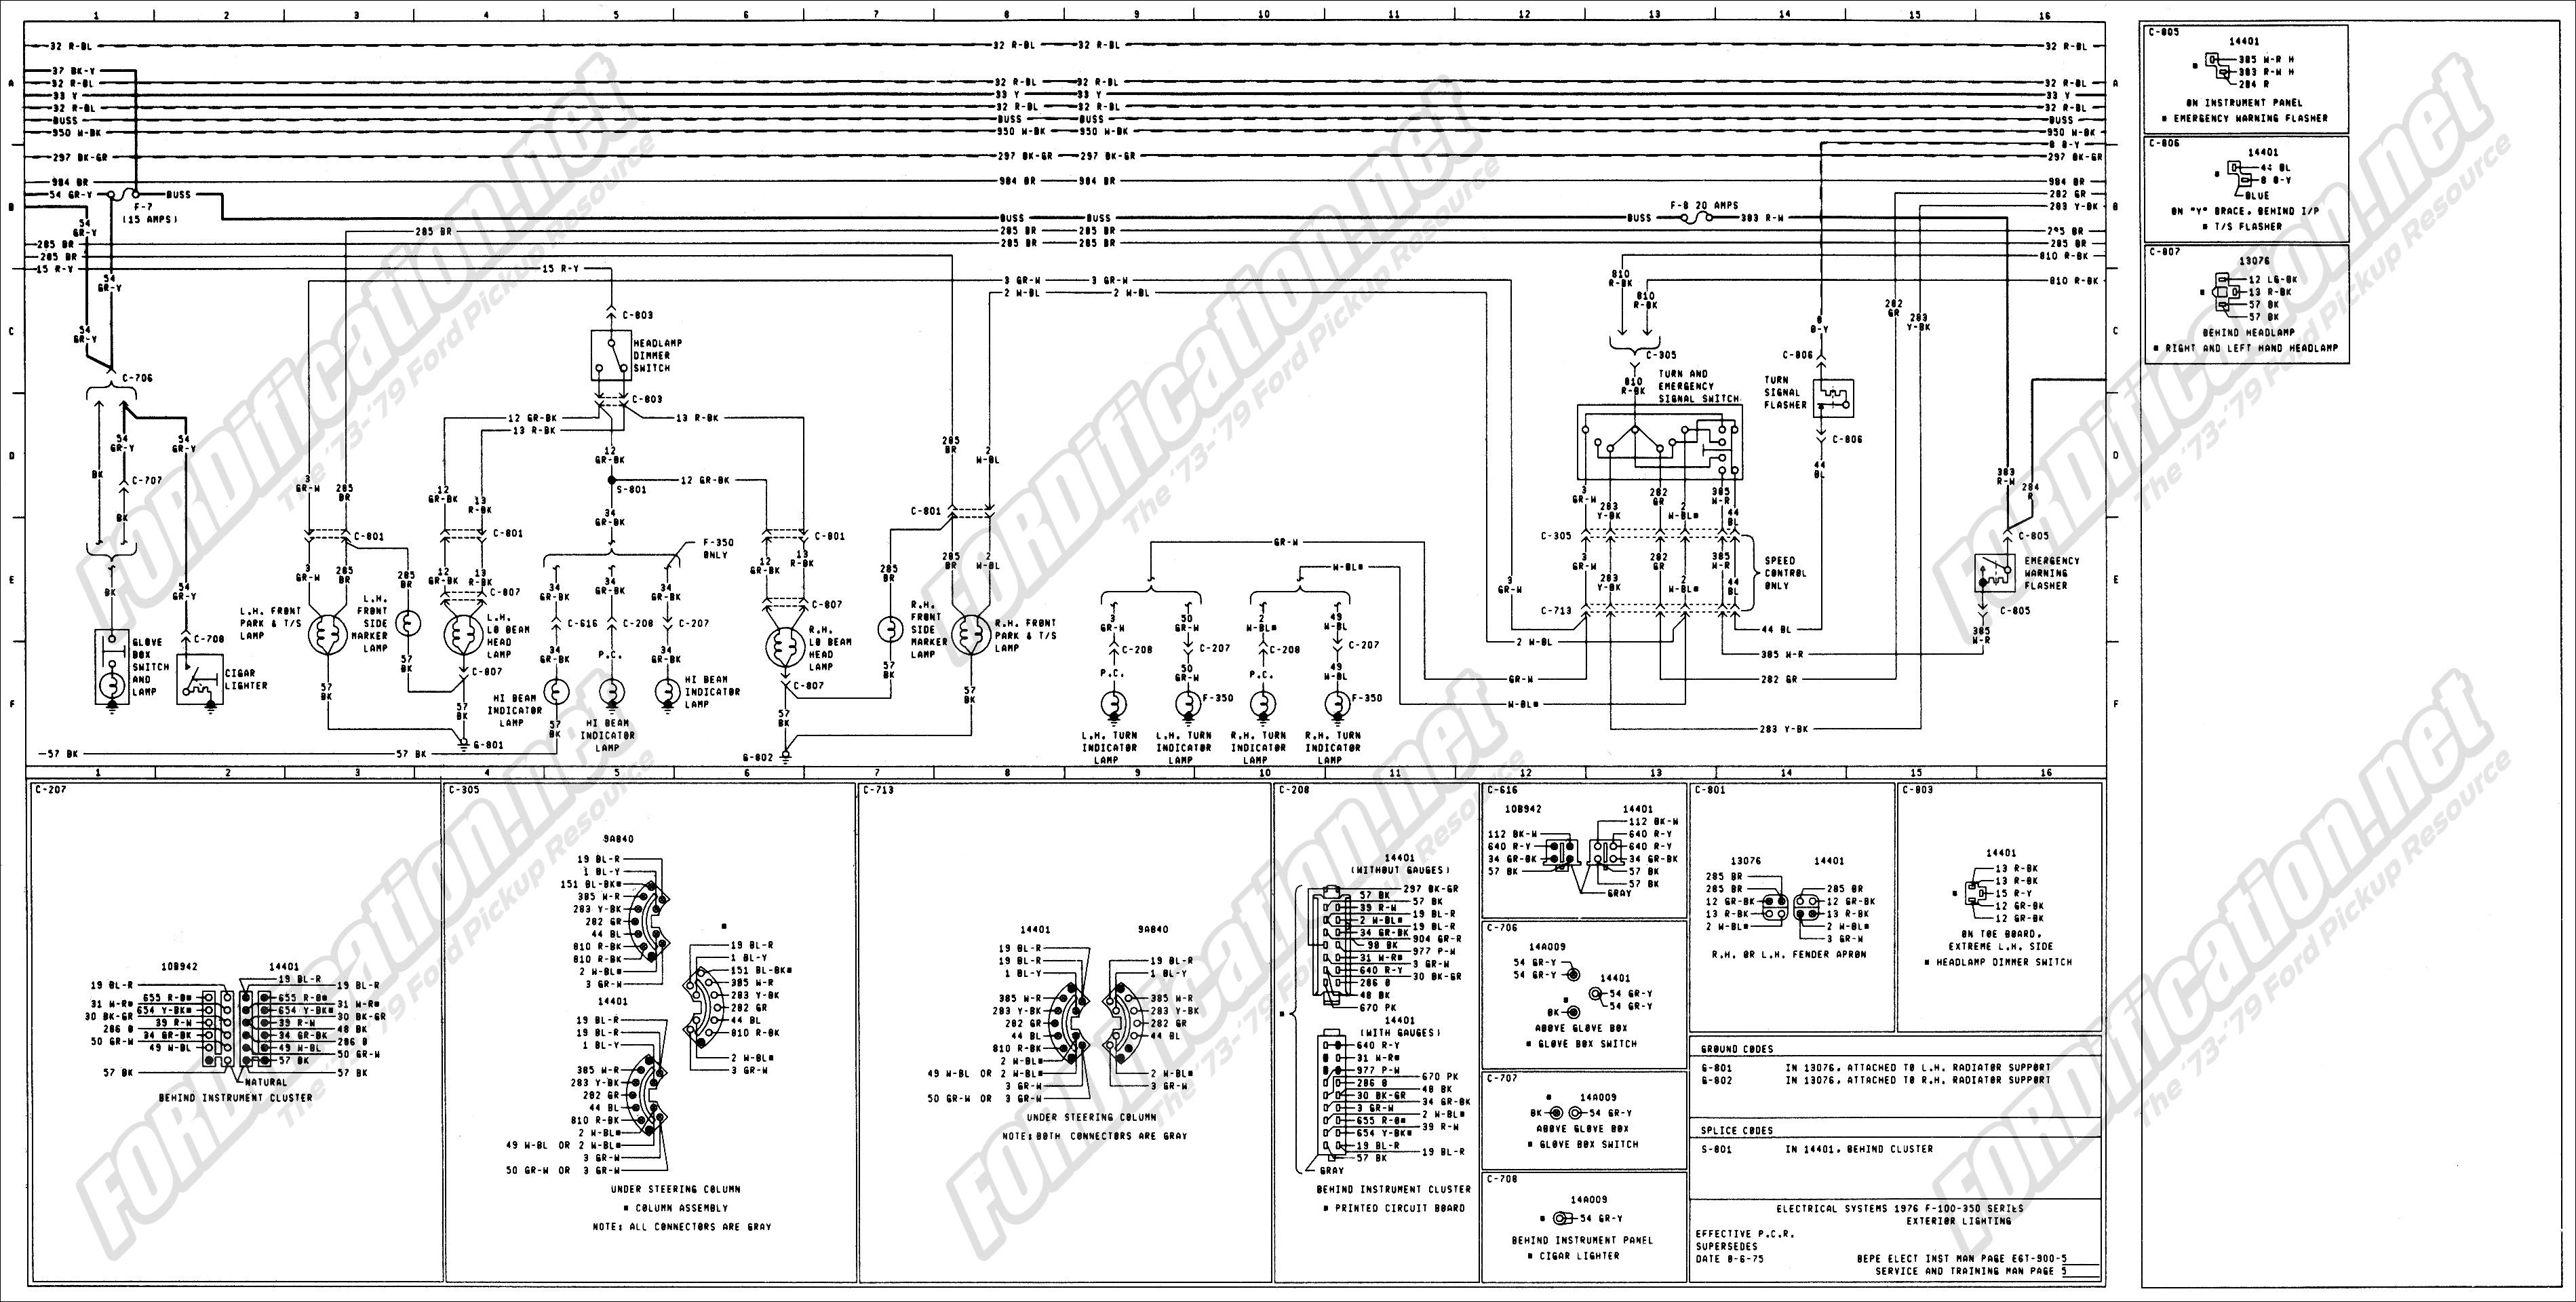 Turn Signal Wiring Diagram Chevy Truck 1973 1979 ford Truck Wiring Diagrams & Schematics fordification Of Turn Signal Wiring Diagram Chevy Truck